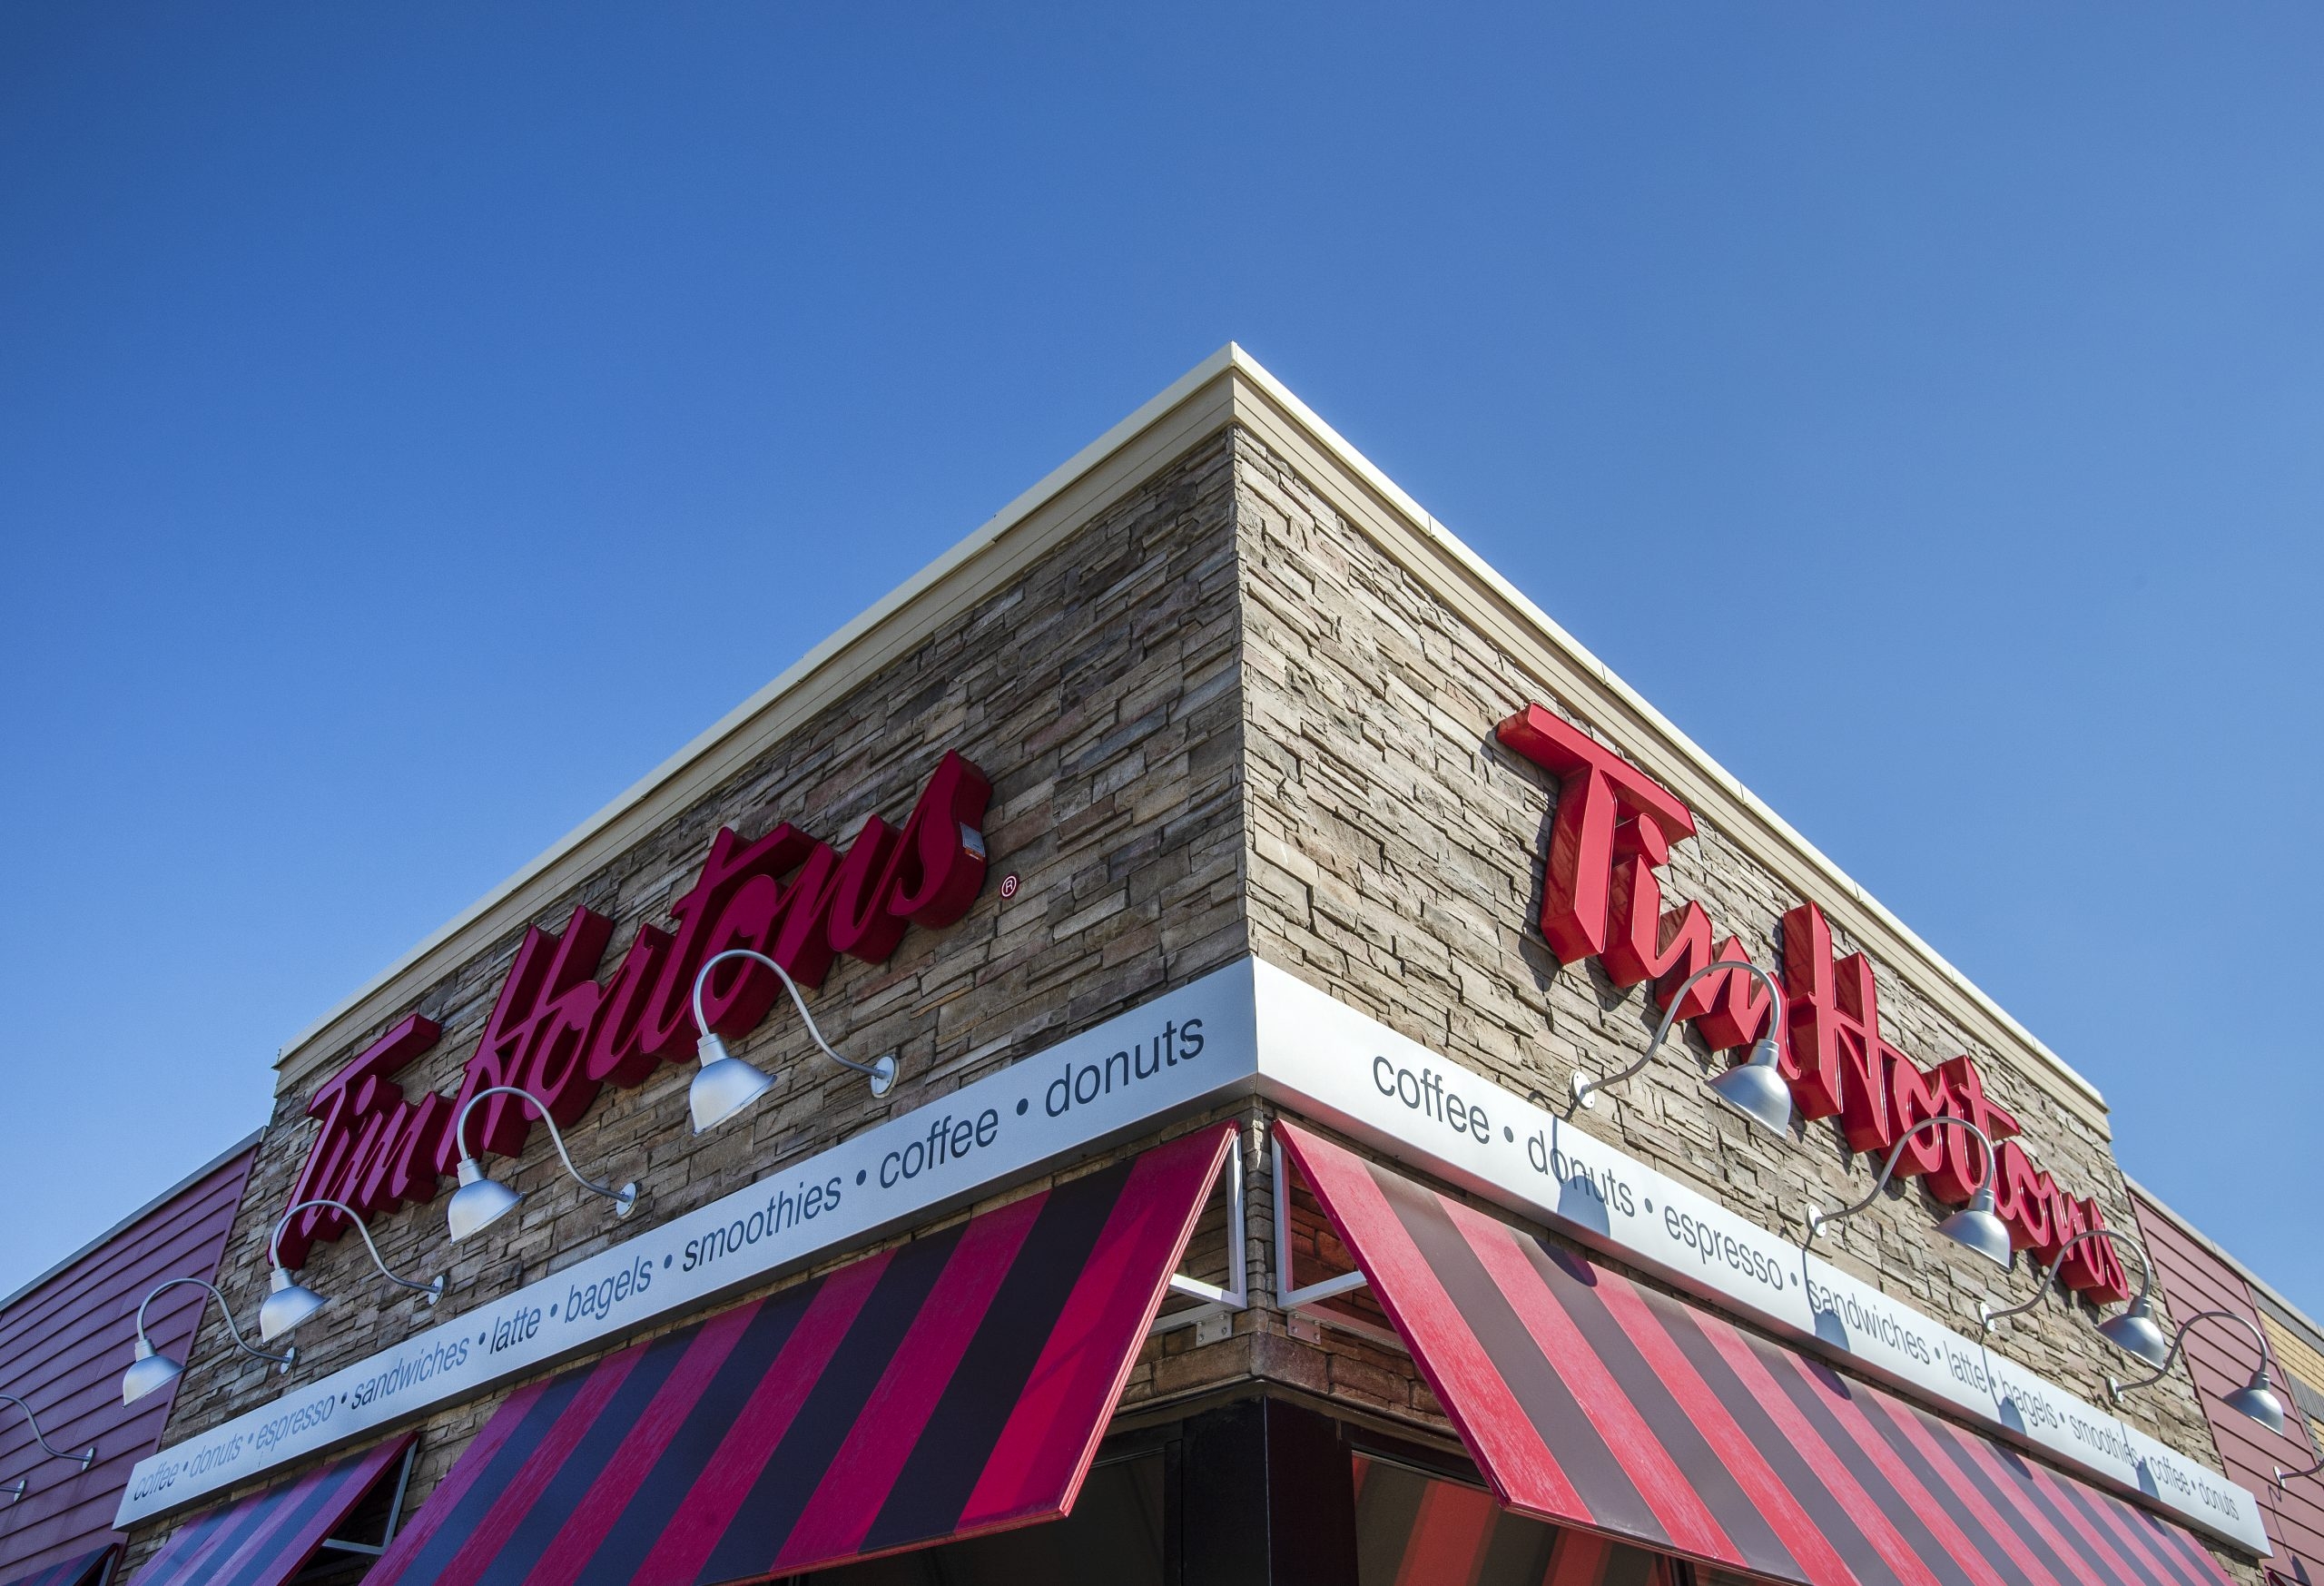 Tim Hortons, the Brazilian coffee chain that wants to be Canadian